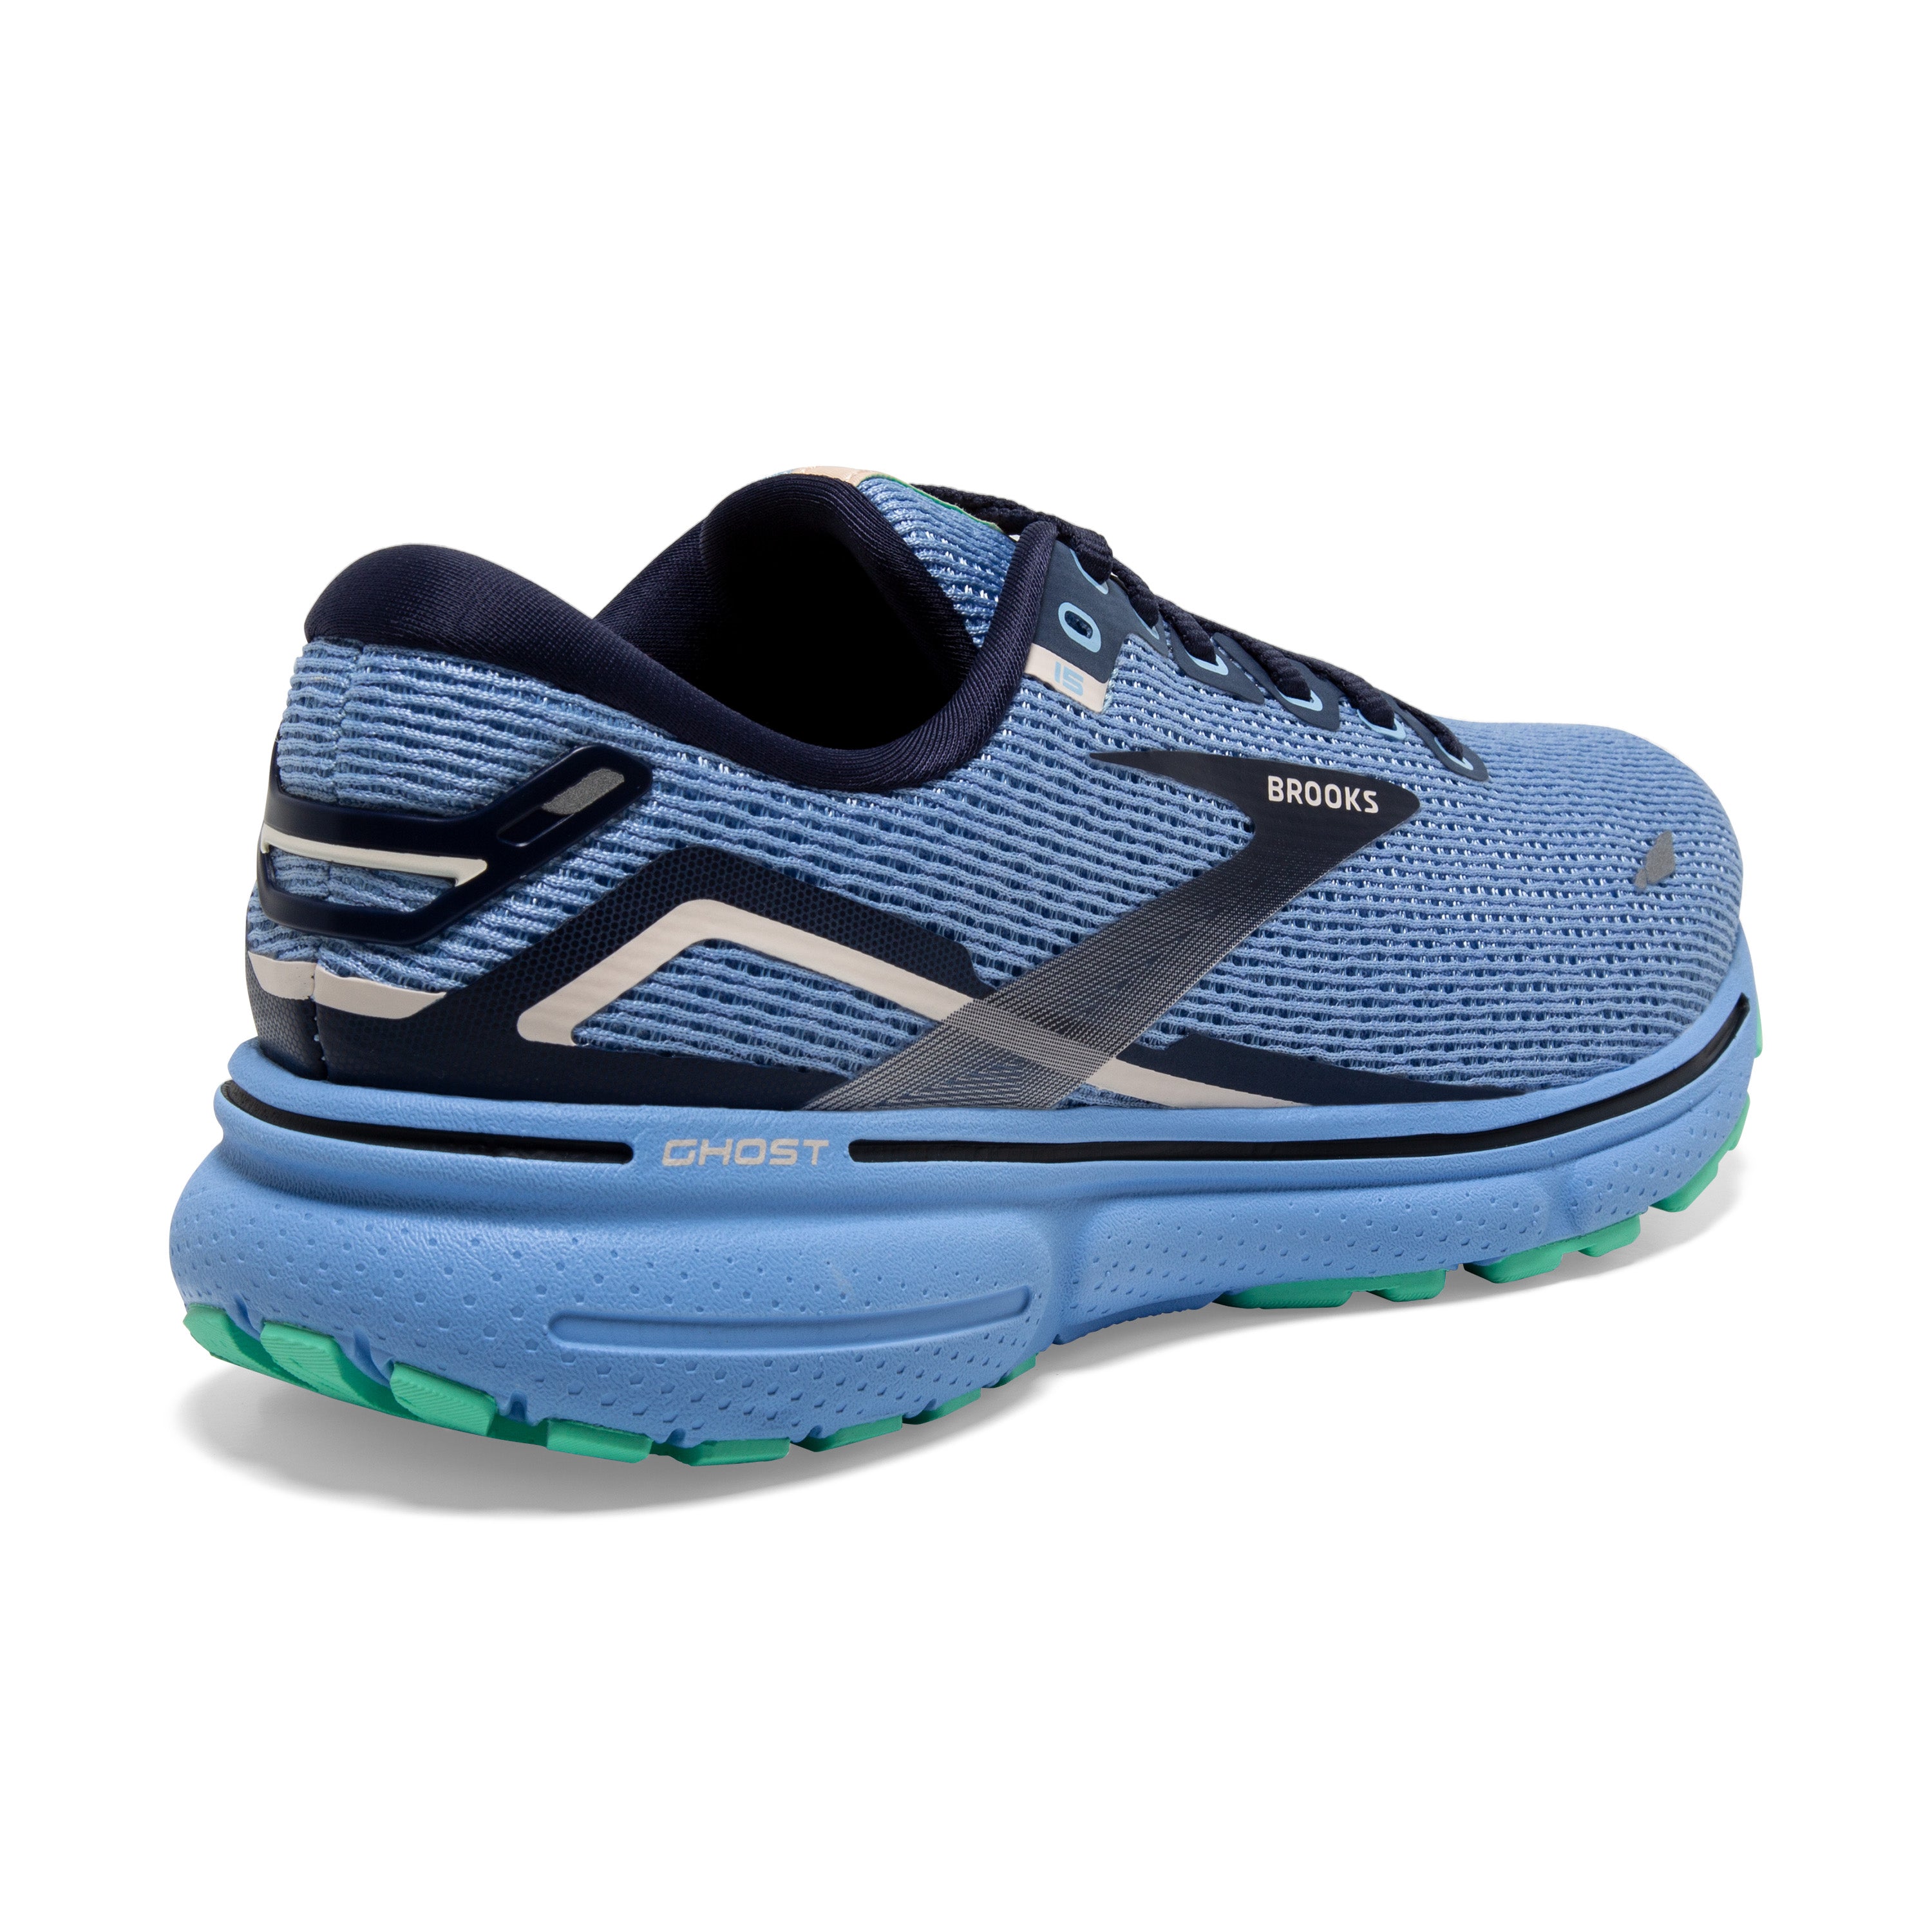 Ghost 15 (LE) - Women's Road Running Shoes